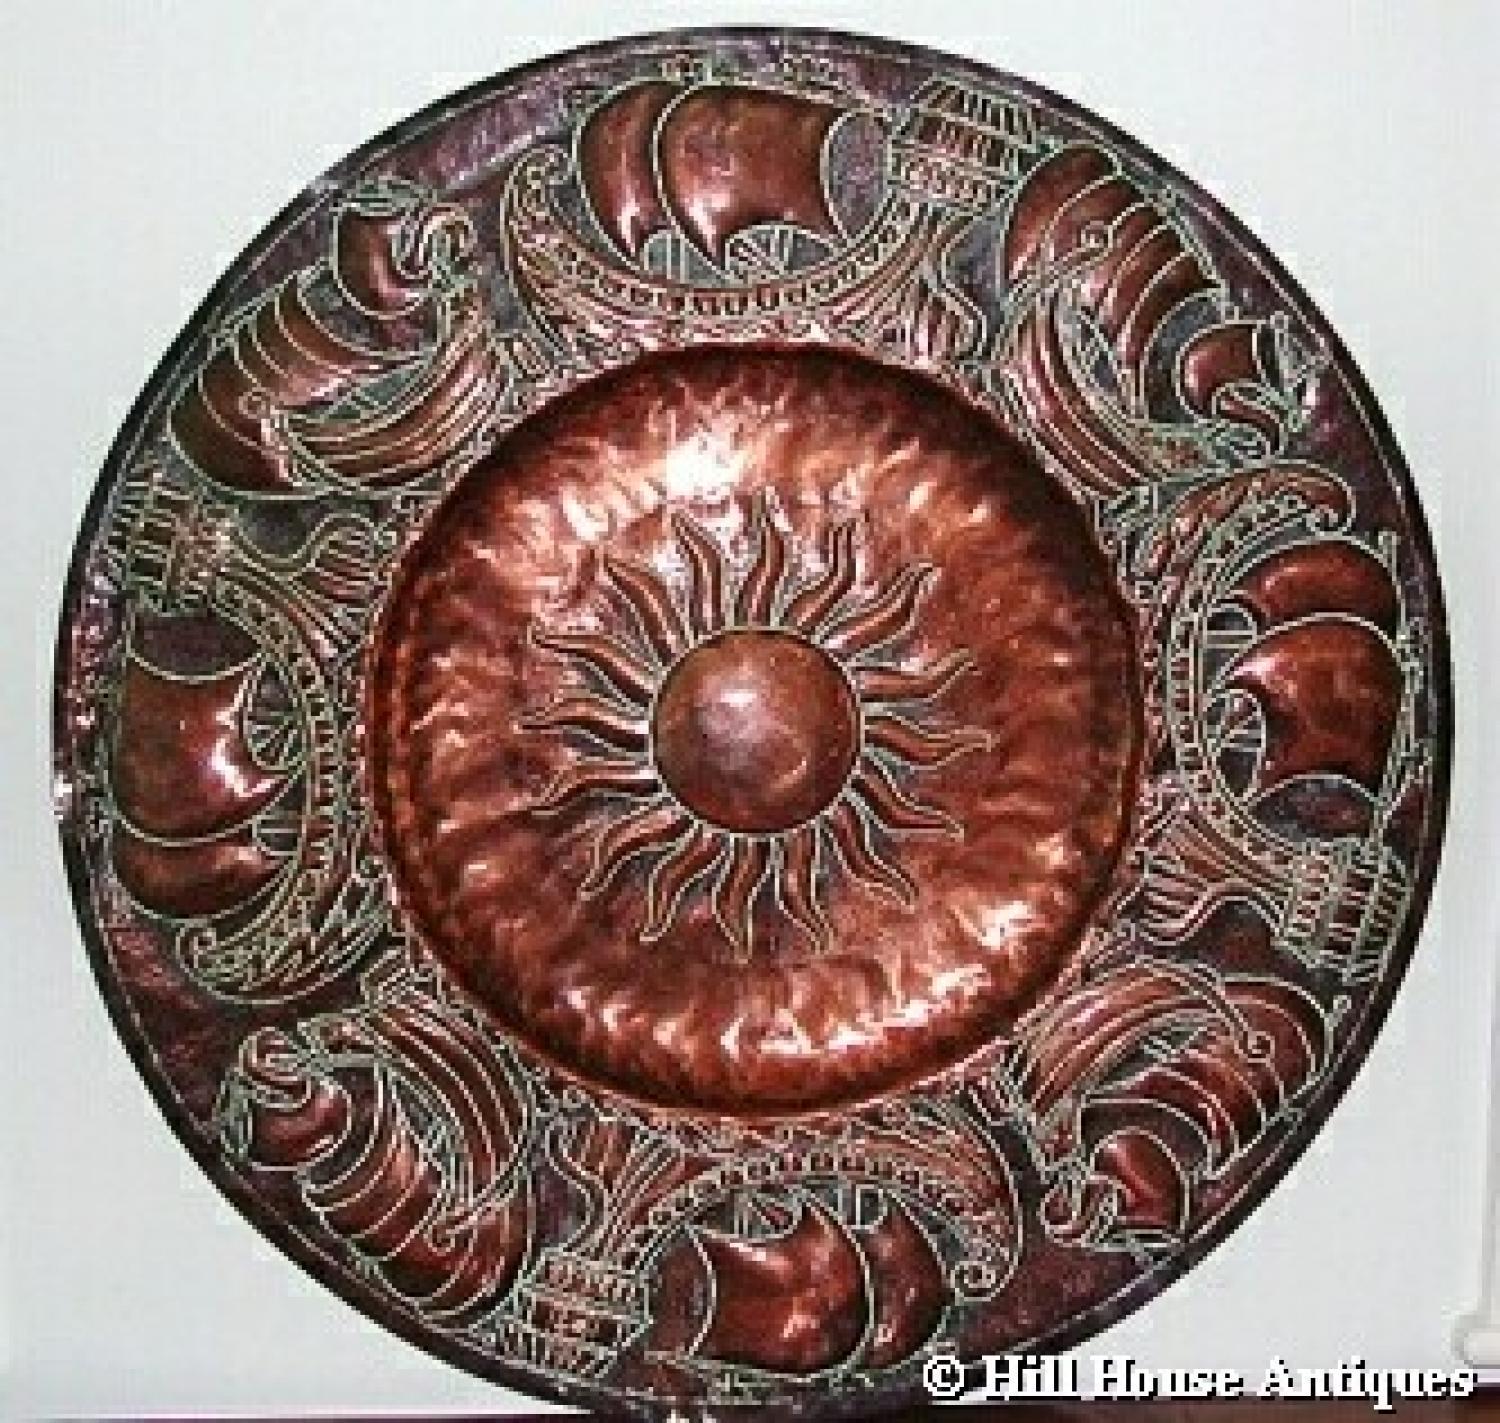 Rare John Pearson Arts & Crafts large copper charger